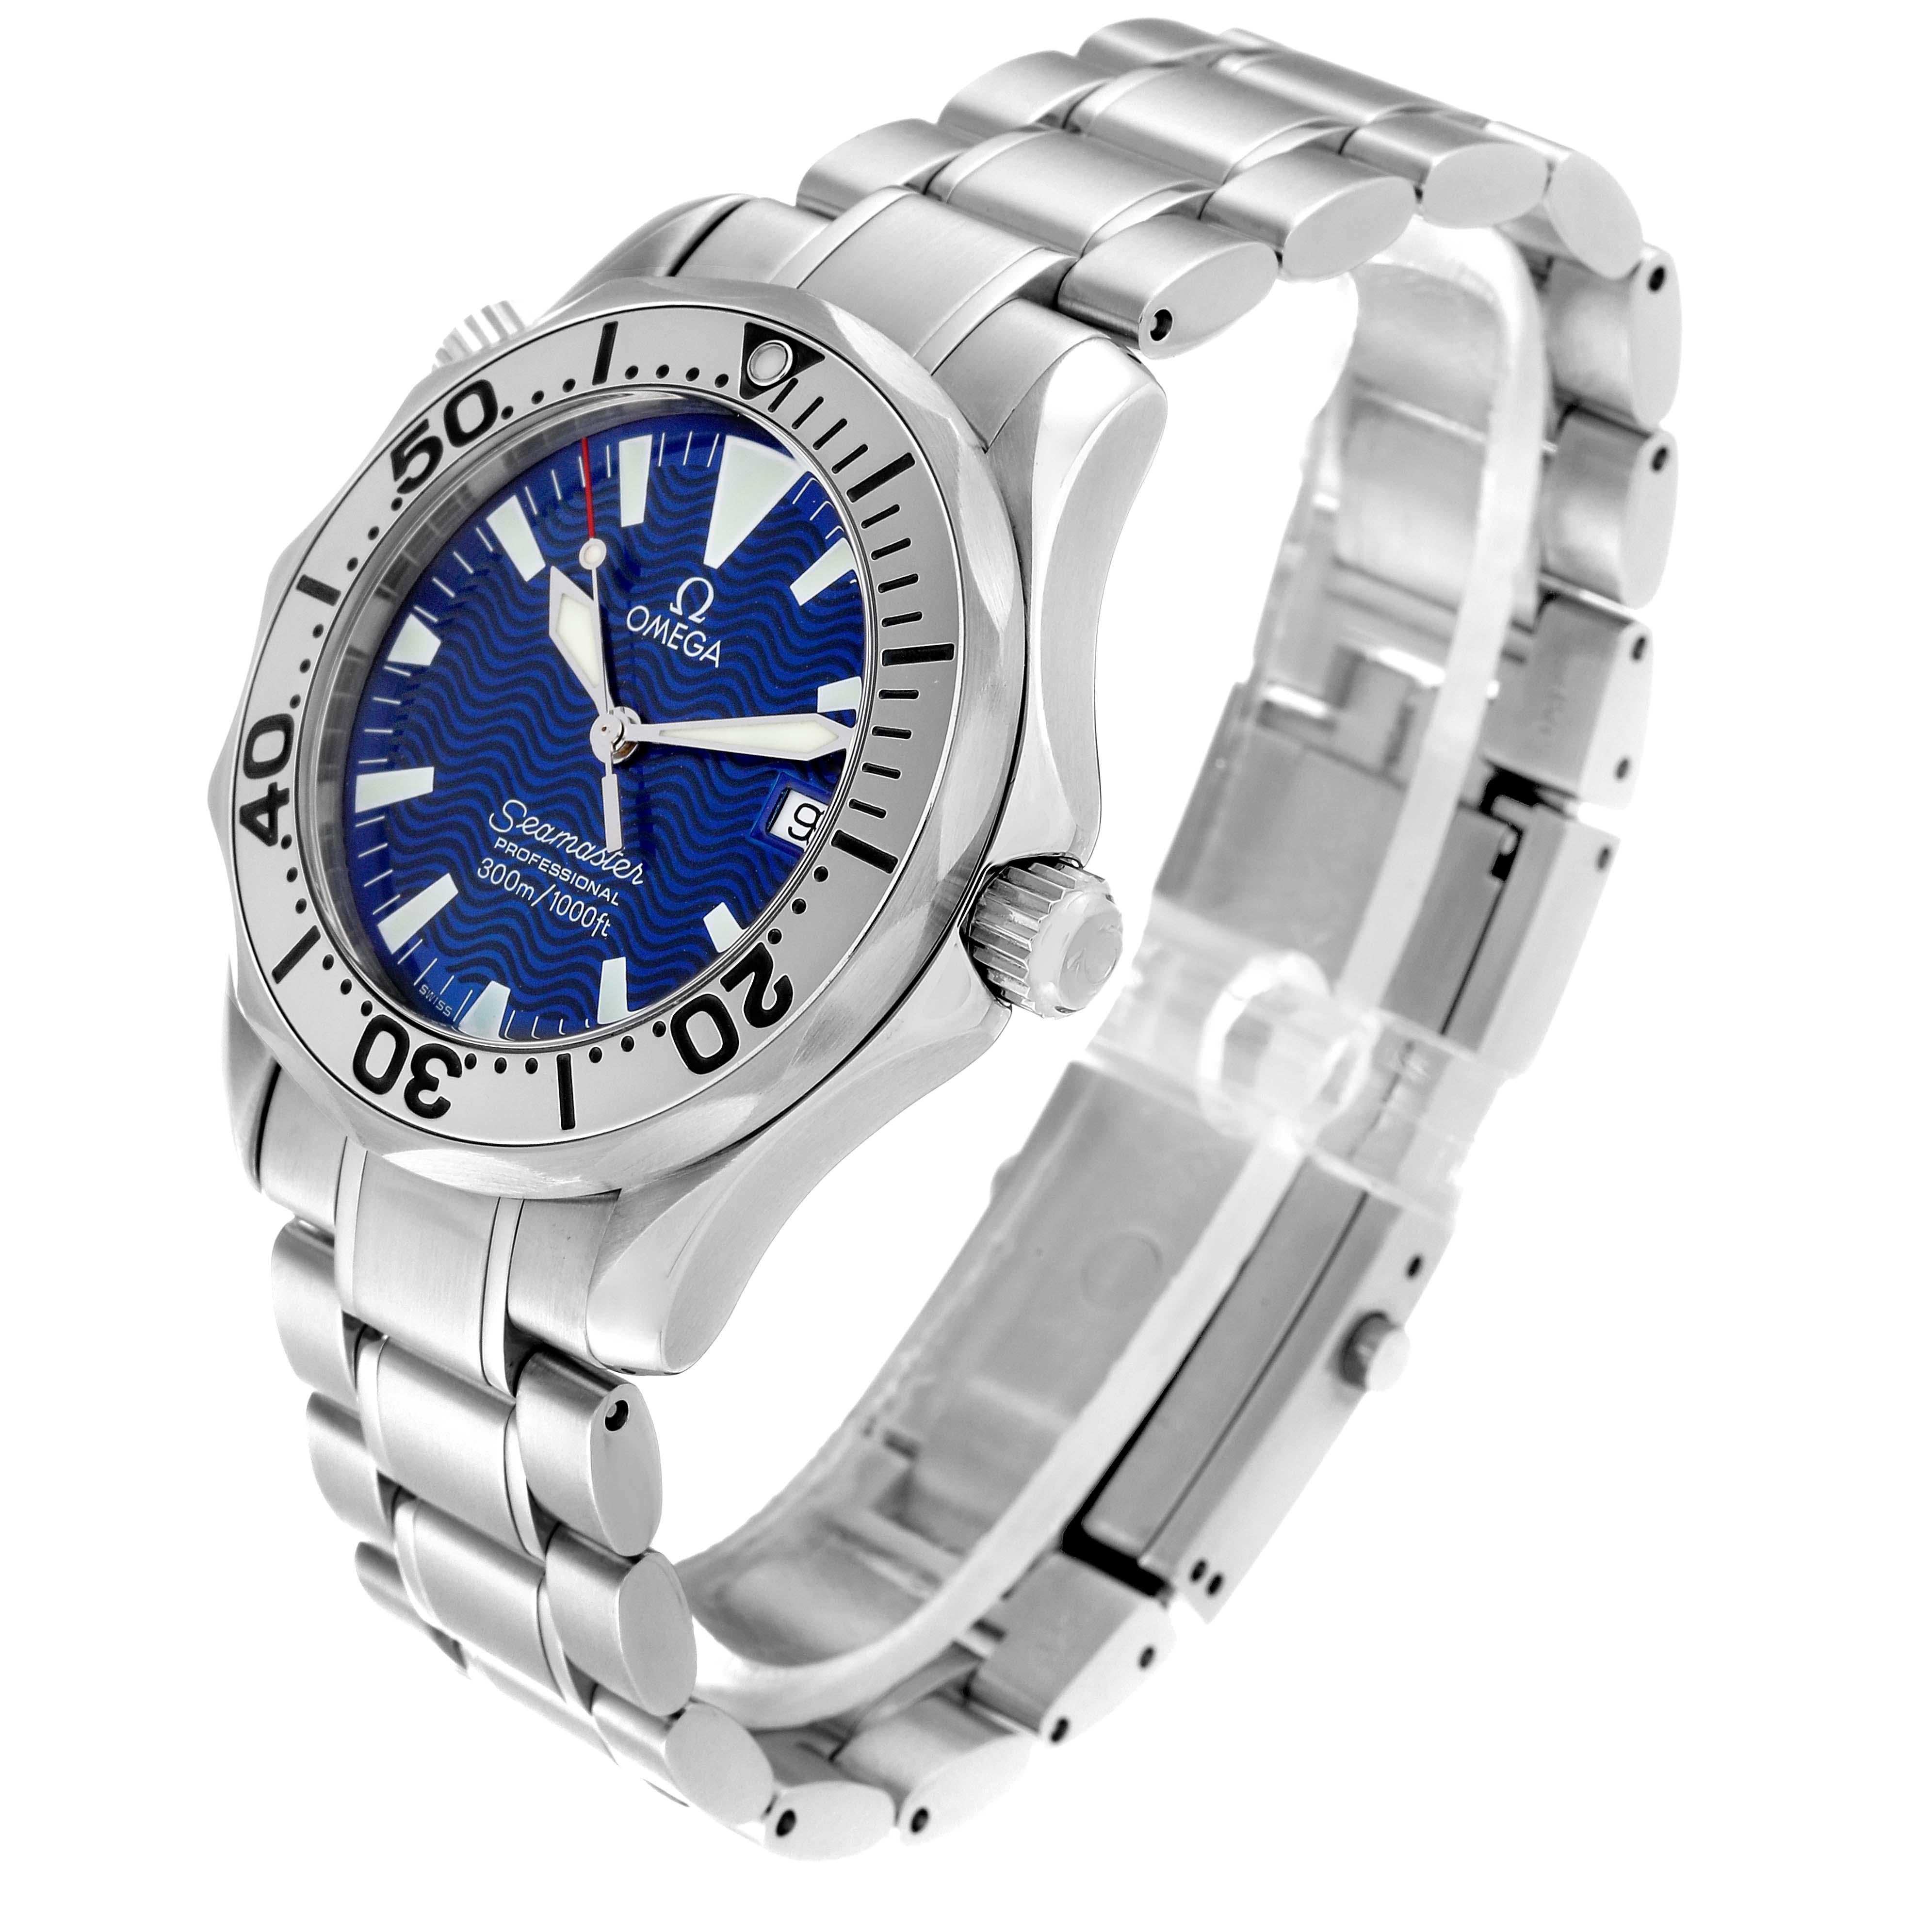 Omega Seamaster Electric Blue Wave Dial Midsize Steel Mens Watch 2263.80.00 4